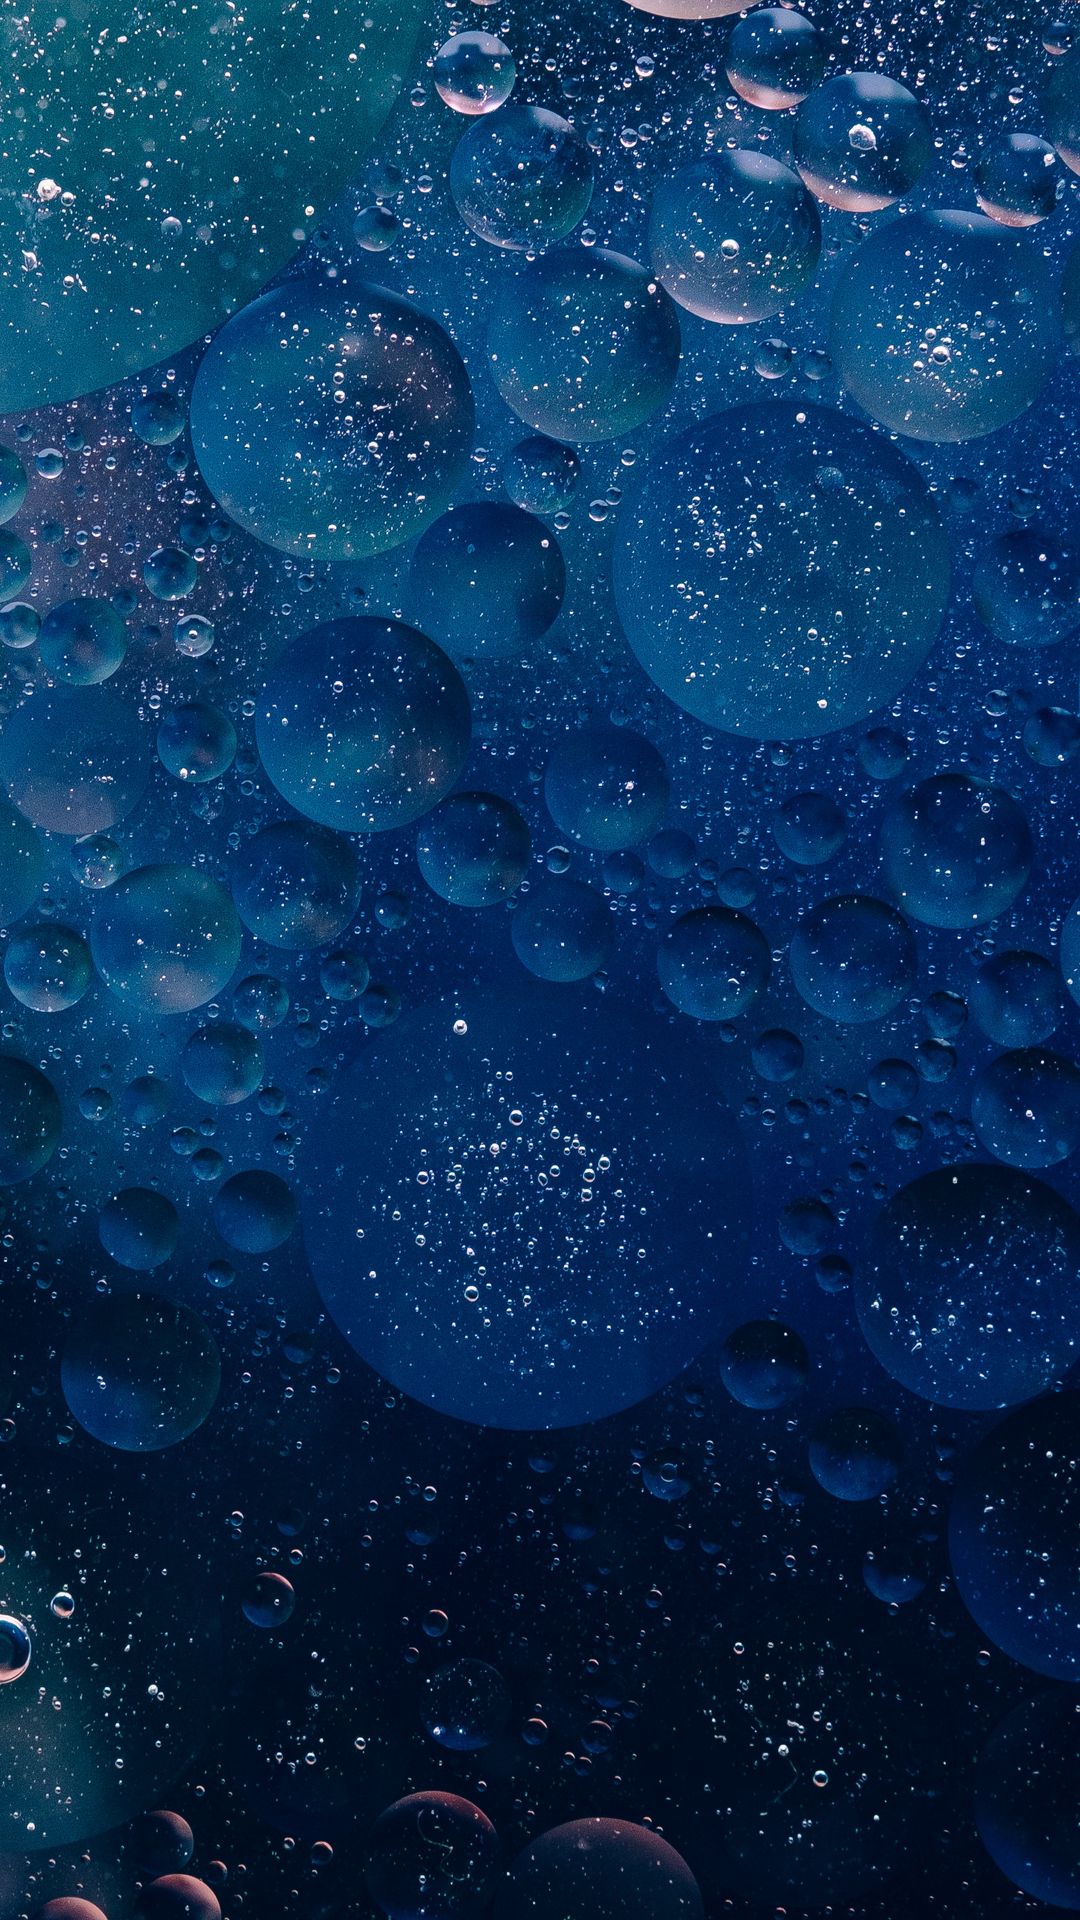 Download wallpaper 1080x1920 circles, bubbles, blue, texture samsung galaxy s s note, sony xperia z, z z z htc one, lenovo vibe HD background